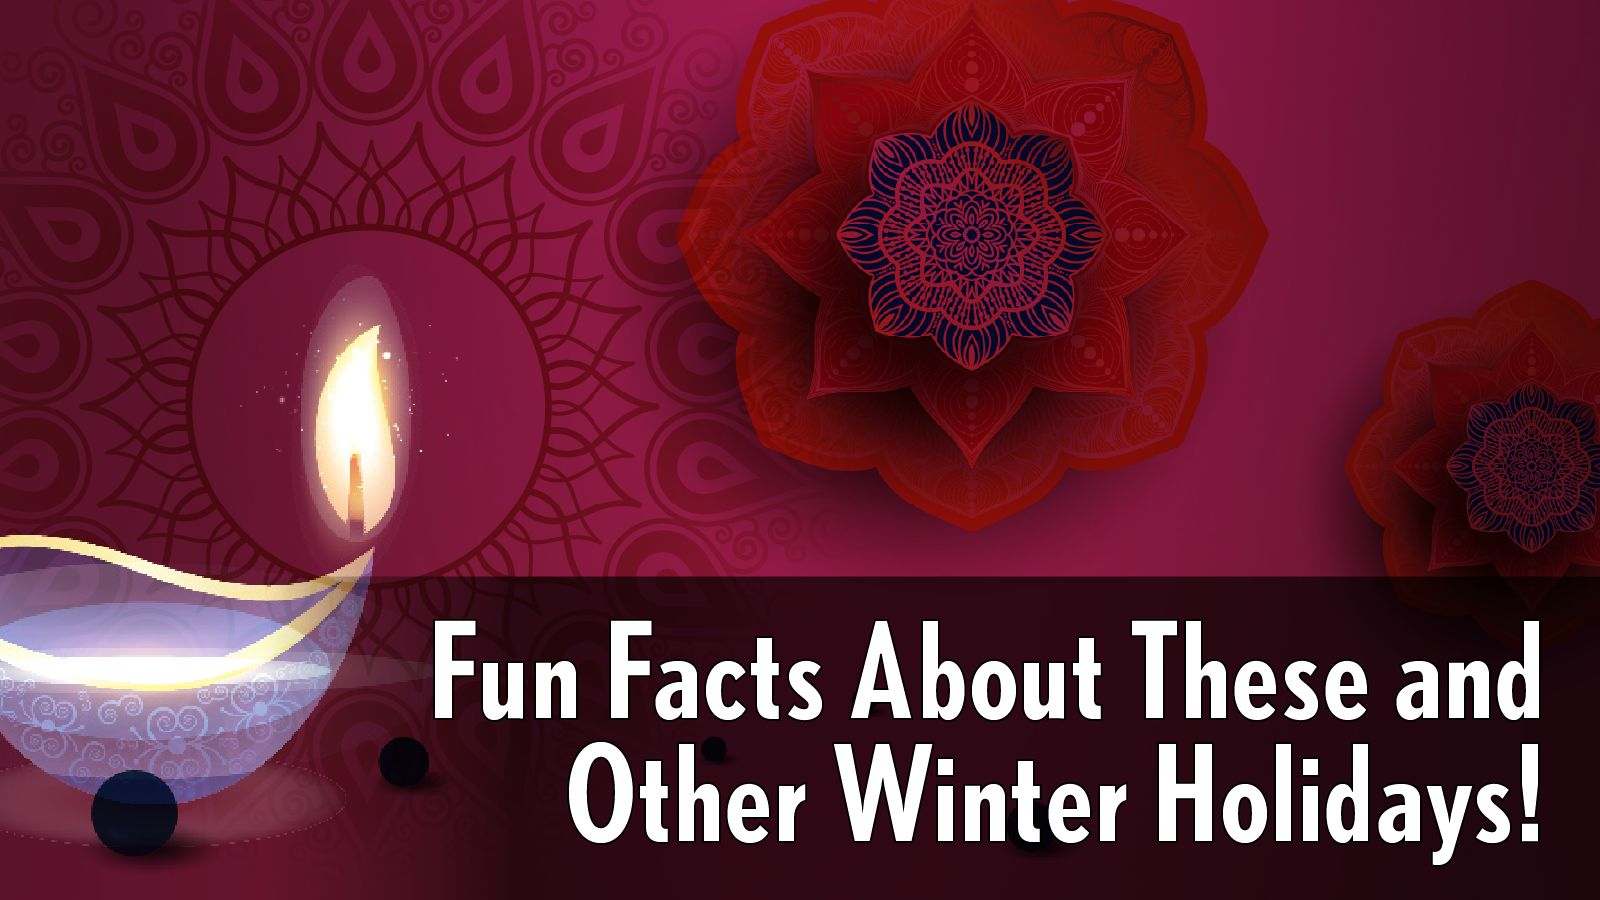 Fun Facts About Winter Holidays!